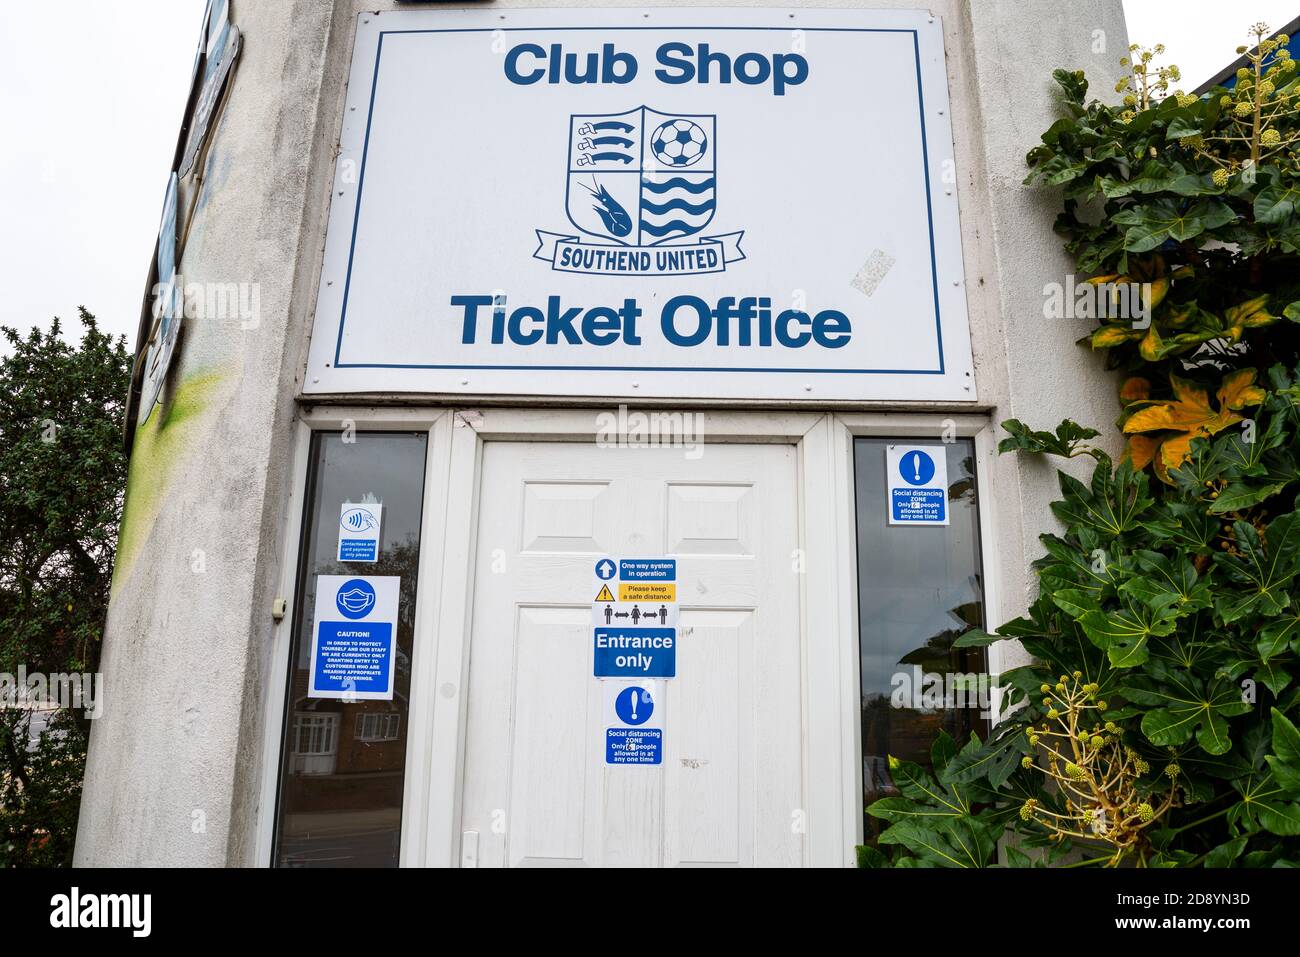 Ticket office and Club Shop at Roots Hall football ground of Southend United football club, Essex, UK. Closed. COVID-19 warnings and guidelines Stock Photo